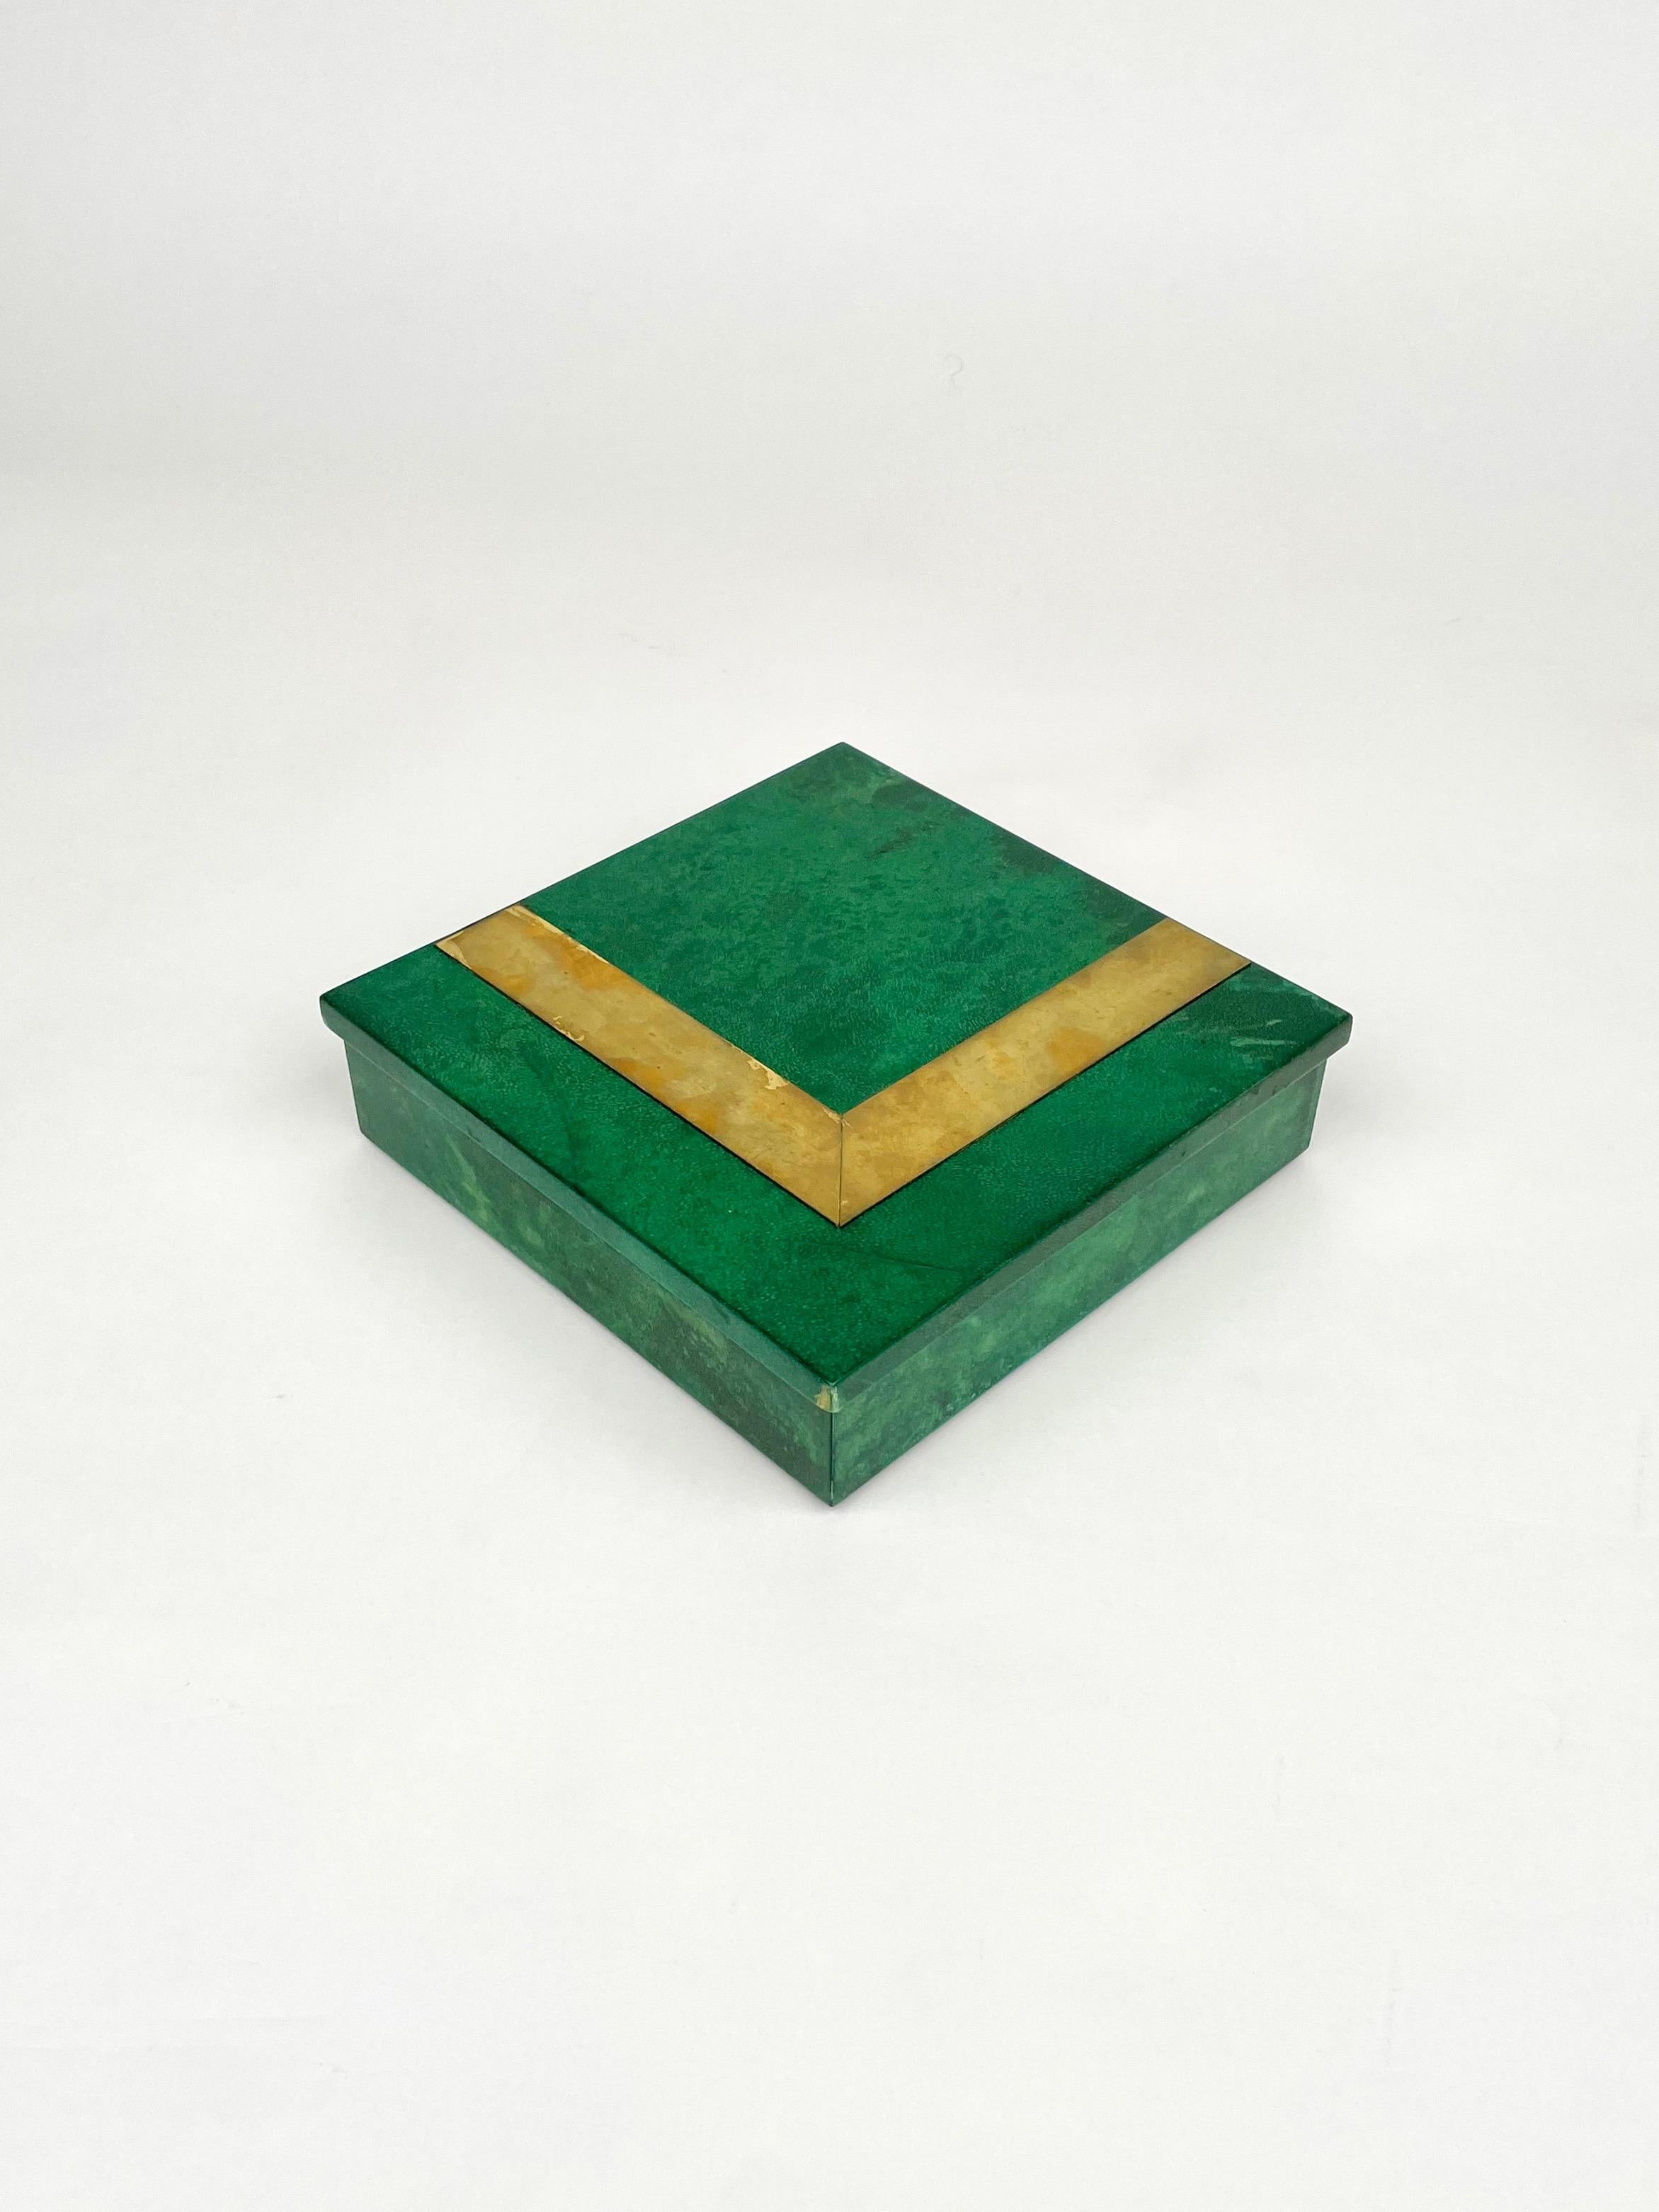 Metal Squared Box in Green Goatskin and Brass Attributed to Aldo Tura, Italy, 1960s For Sale